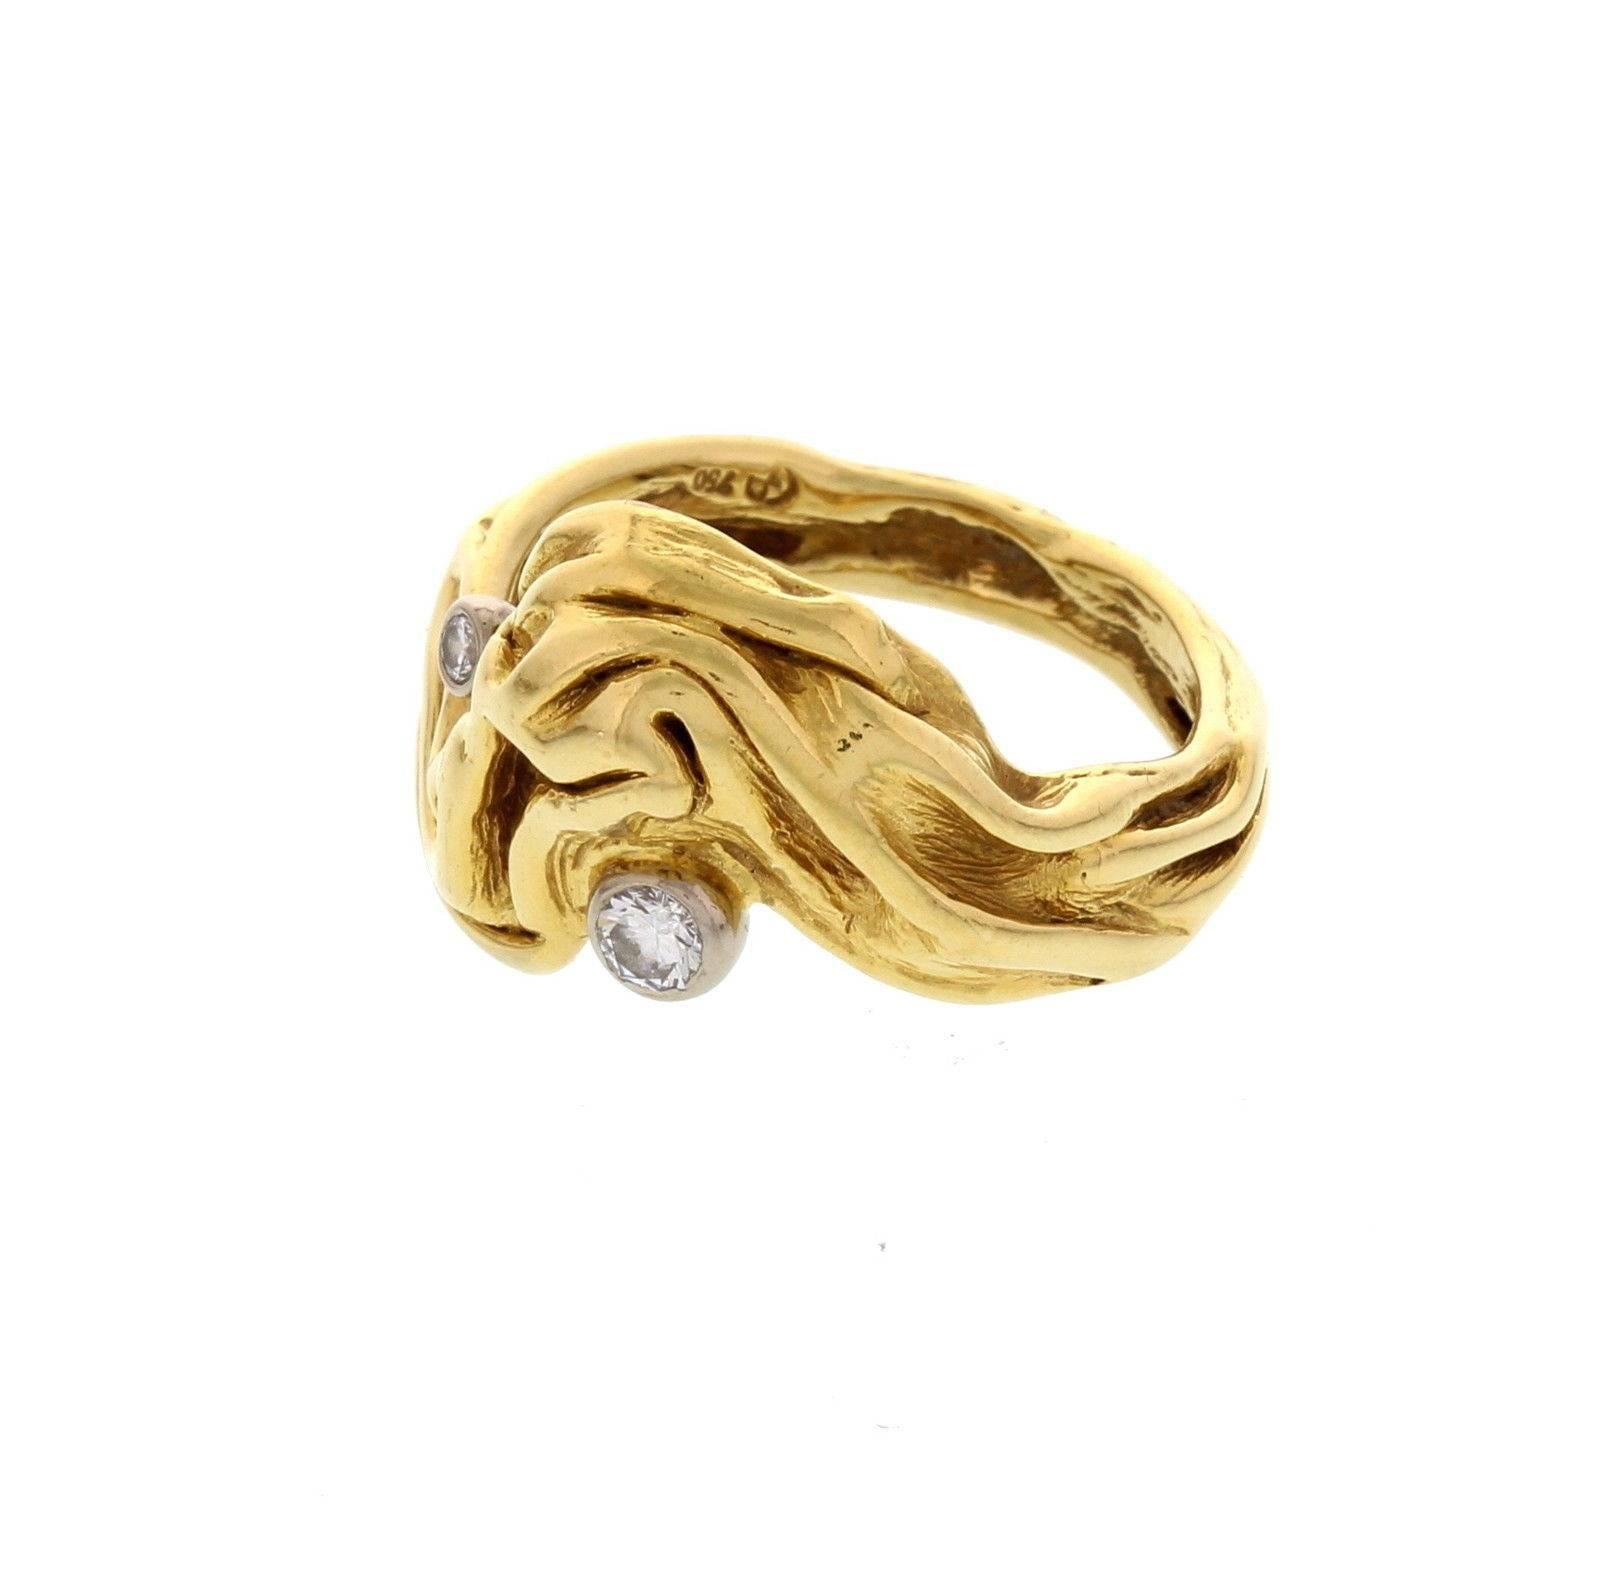 A modernist ring hand crafted in 18 k yellow gold, accented with two diamonds by Gilbert Albert. Circa 1970's. Marked with maker mark and 750.
Ring size:  6.75. Weight: 7.8 grams. Measured: 0.88 inches x 0.88 inches x 05 inches.